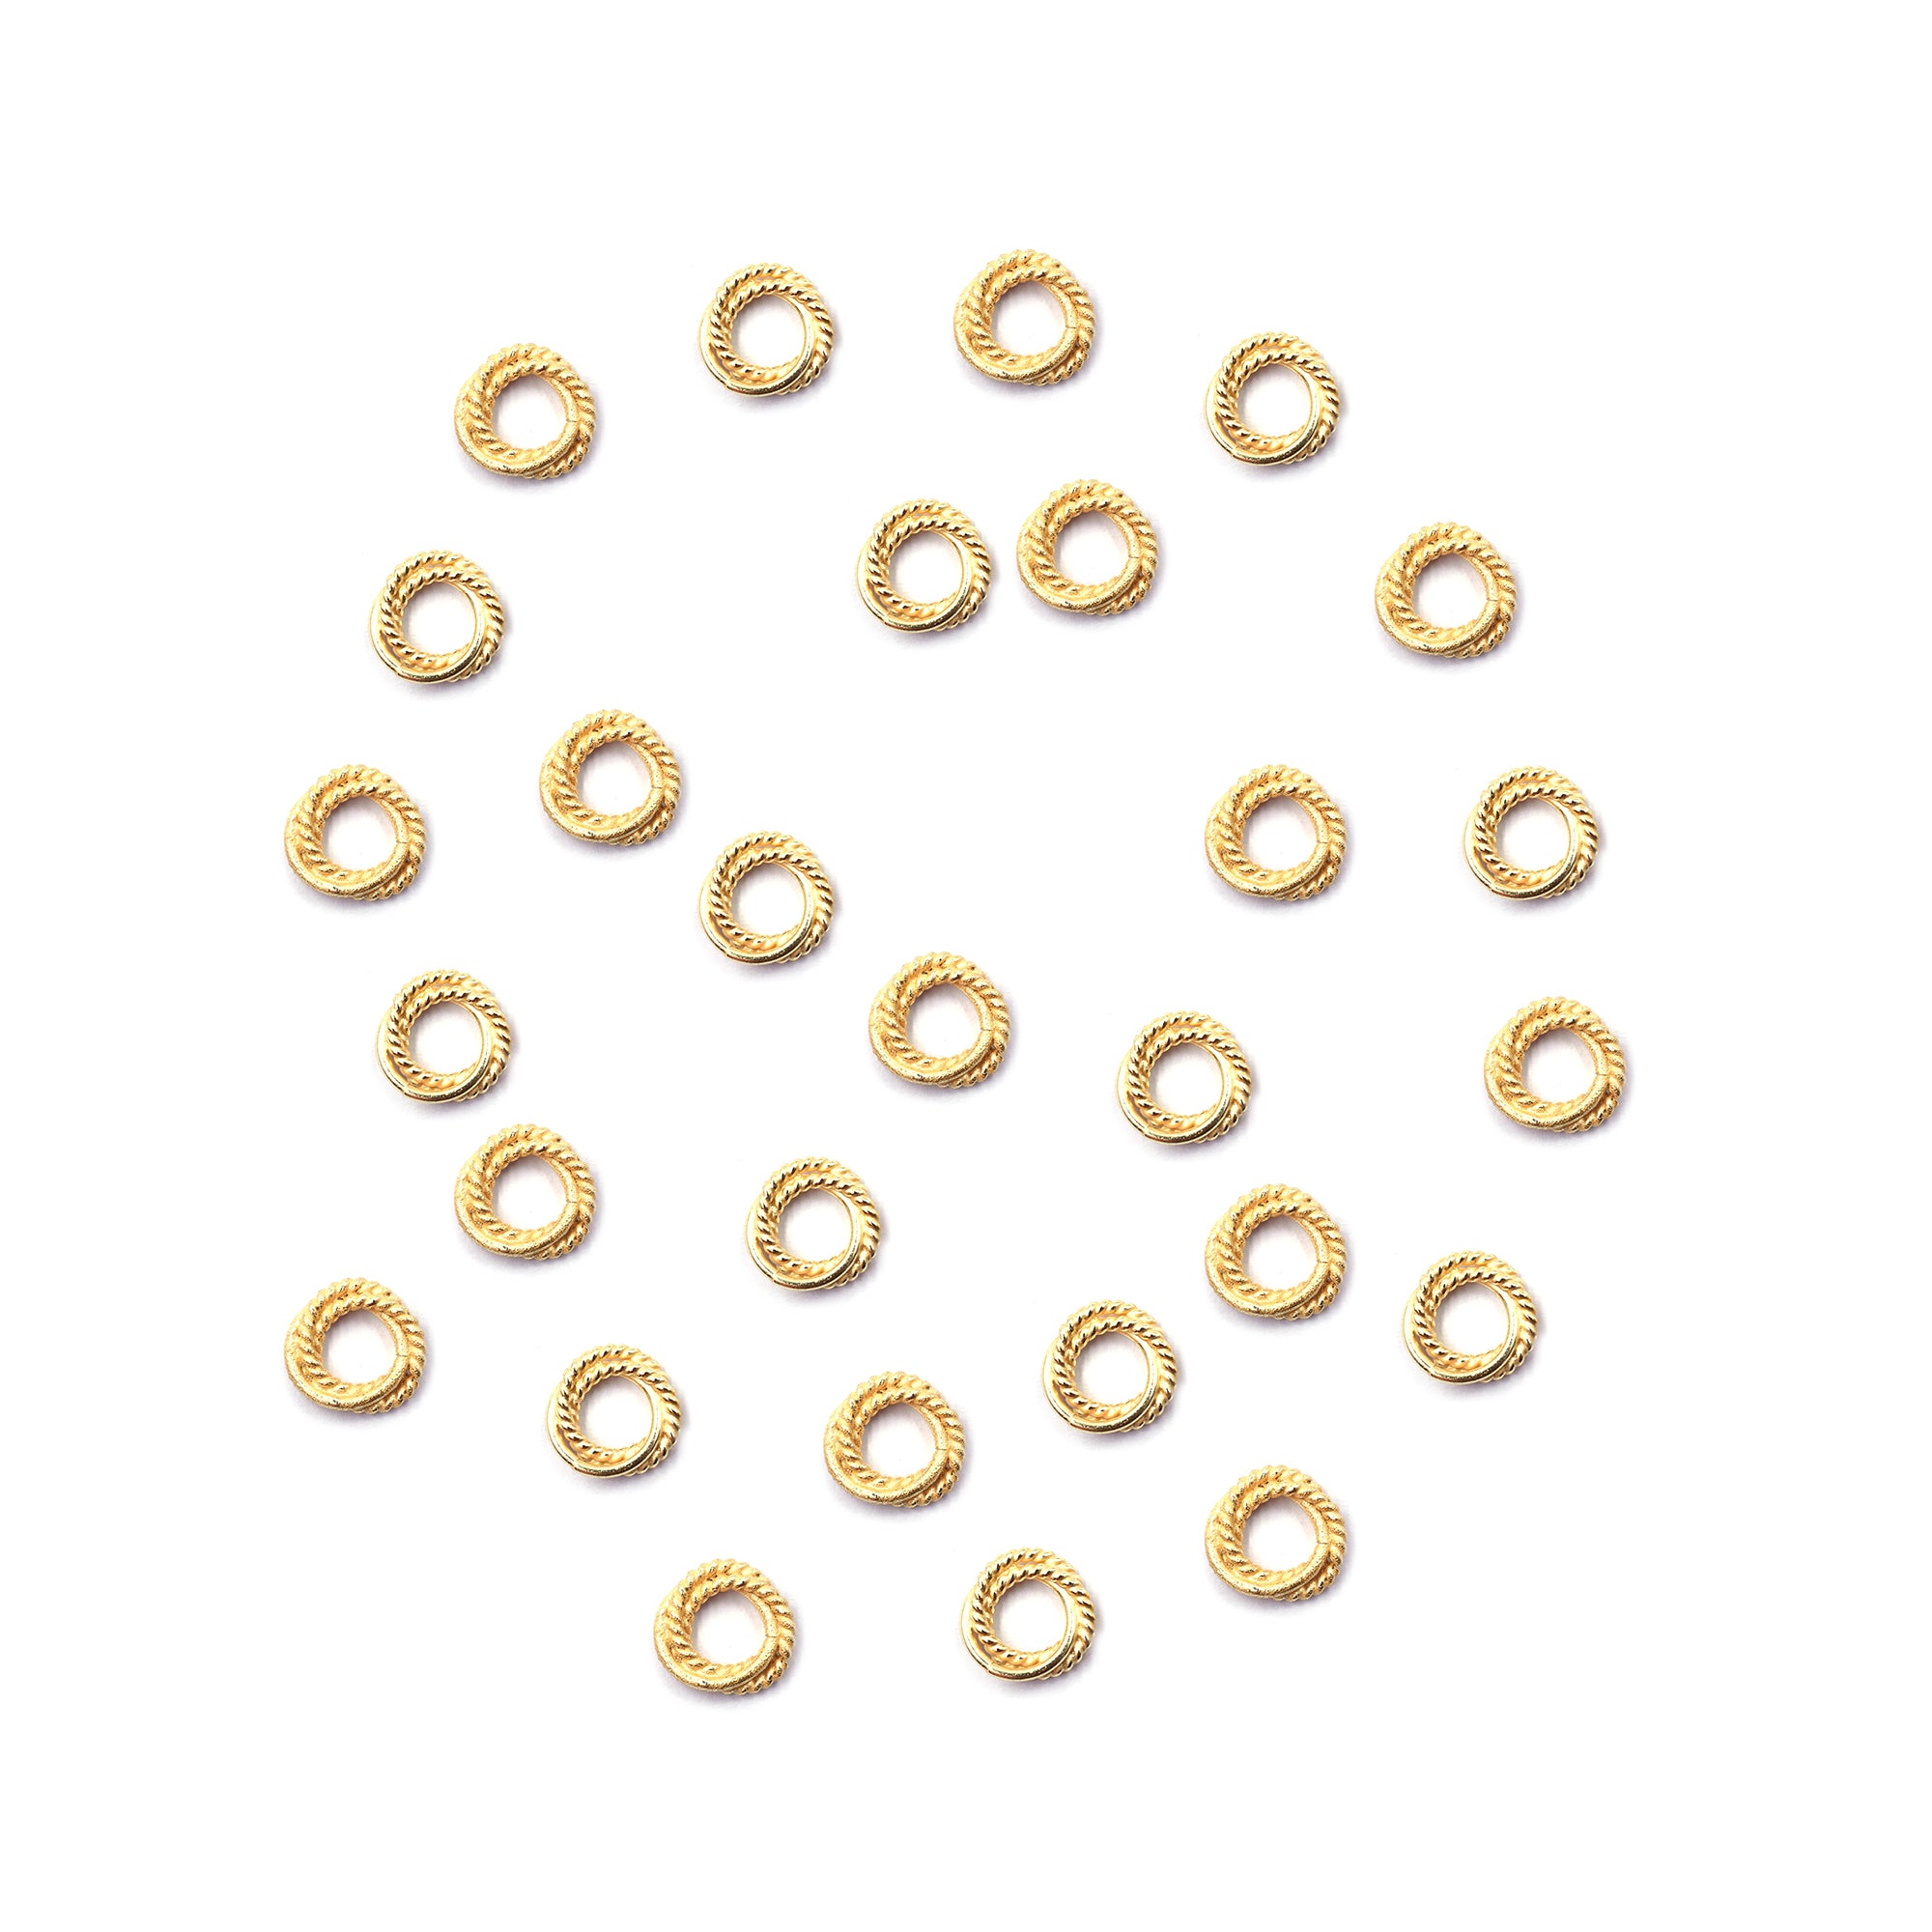 30 Pcs 10mm Twisted Wire Jump Ring Gold Plated Copper